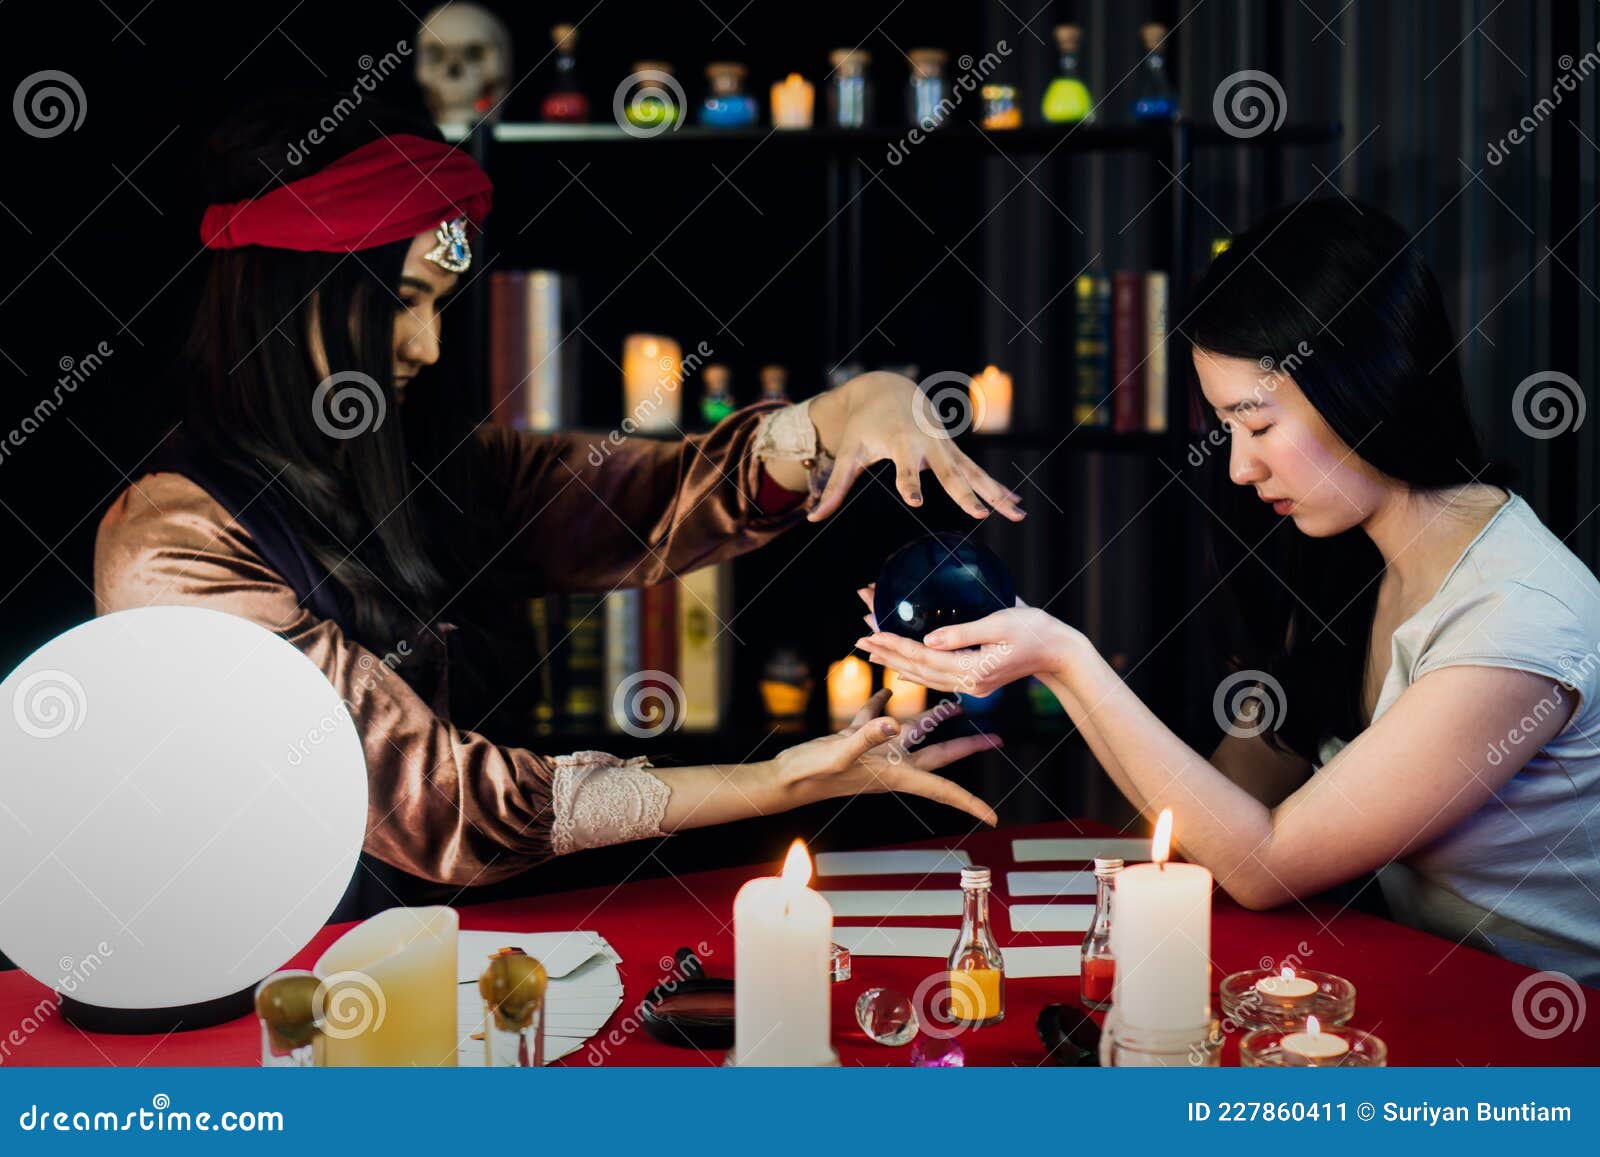 woman fortune teller ritual luck prophecy